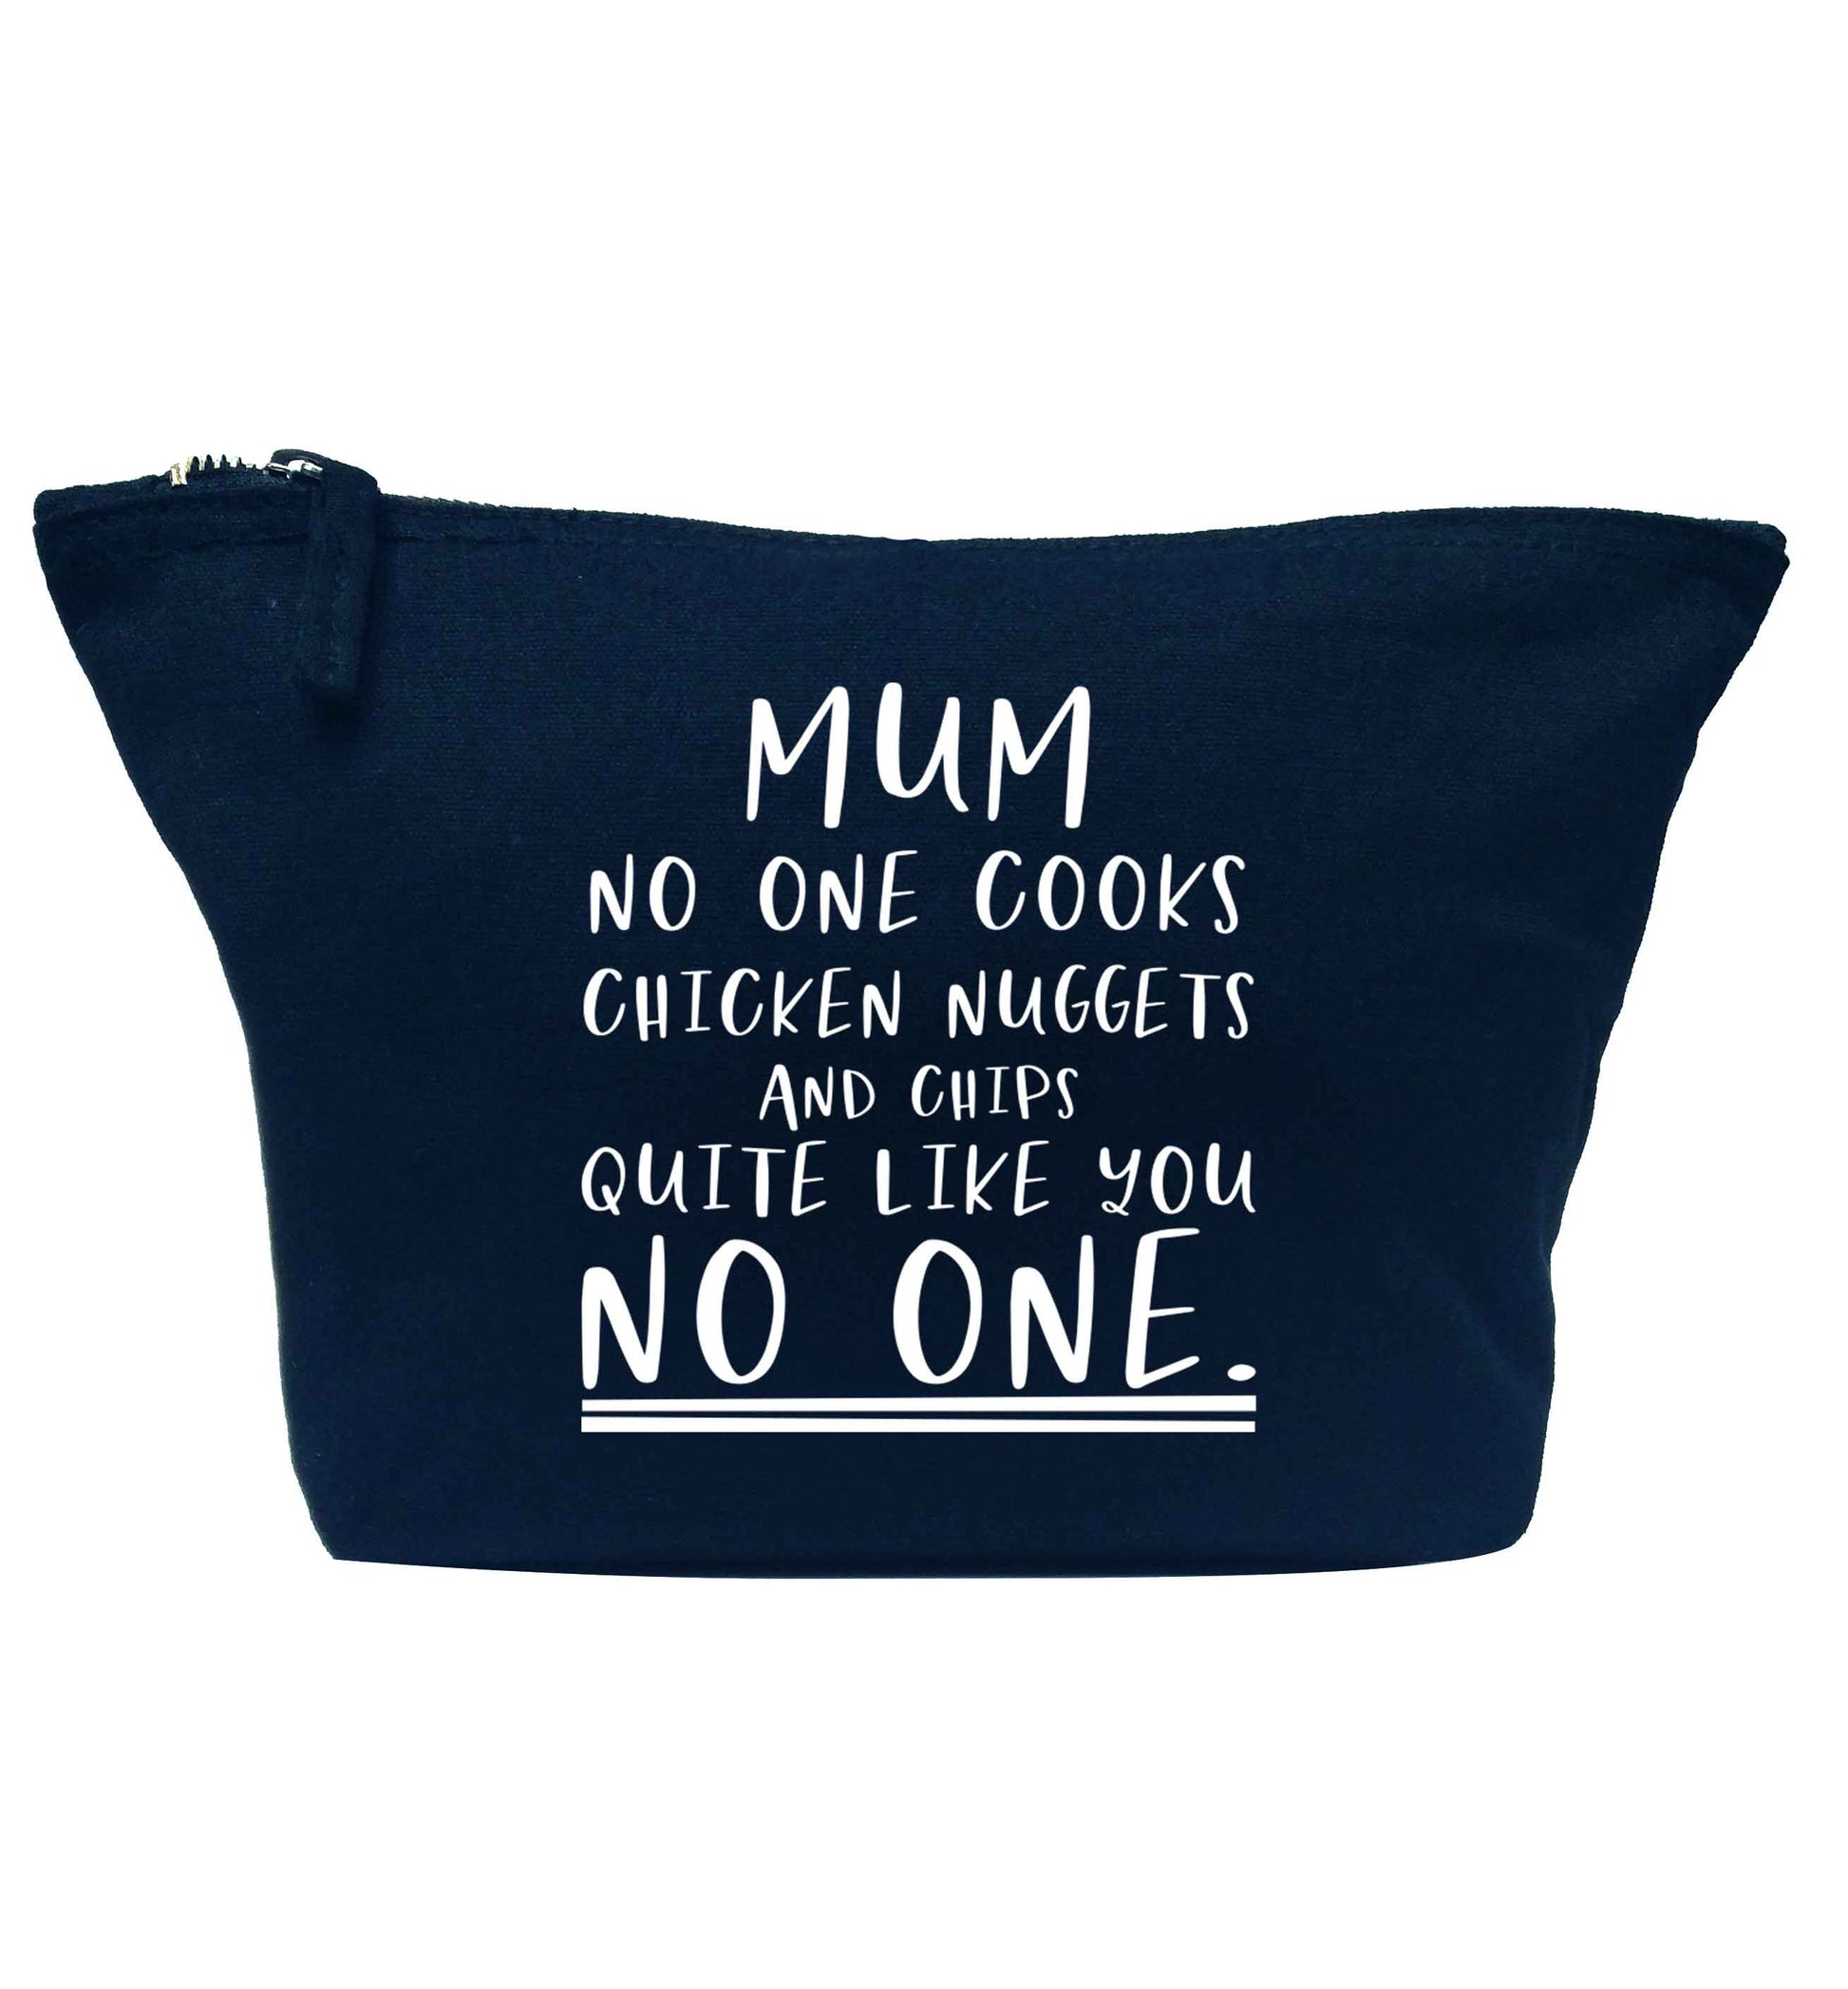 Super funny sassy gift for mother's day or birthday!  Mum no one cooks chicken nuggets and chips like you no one navy makeup bag